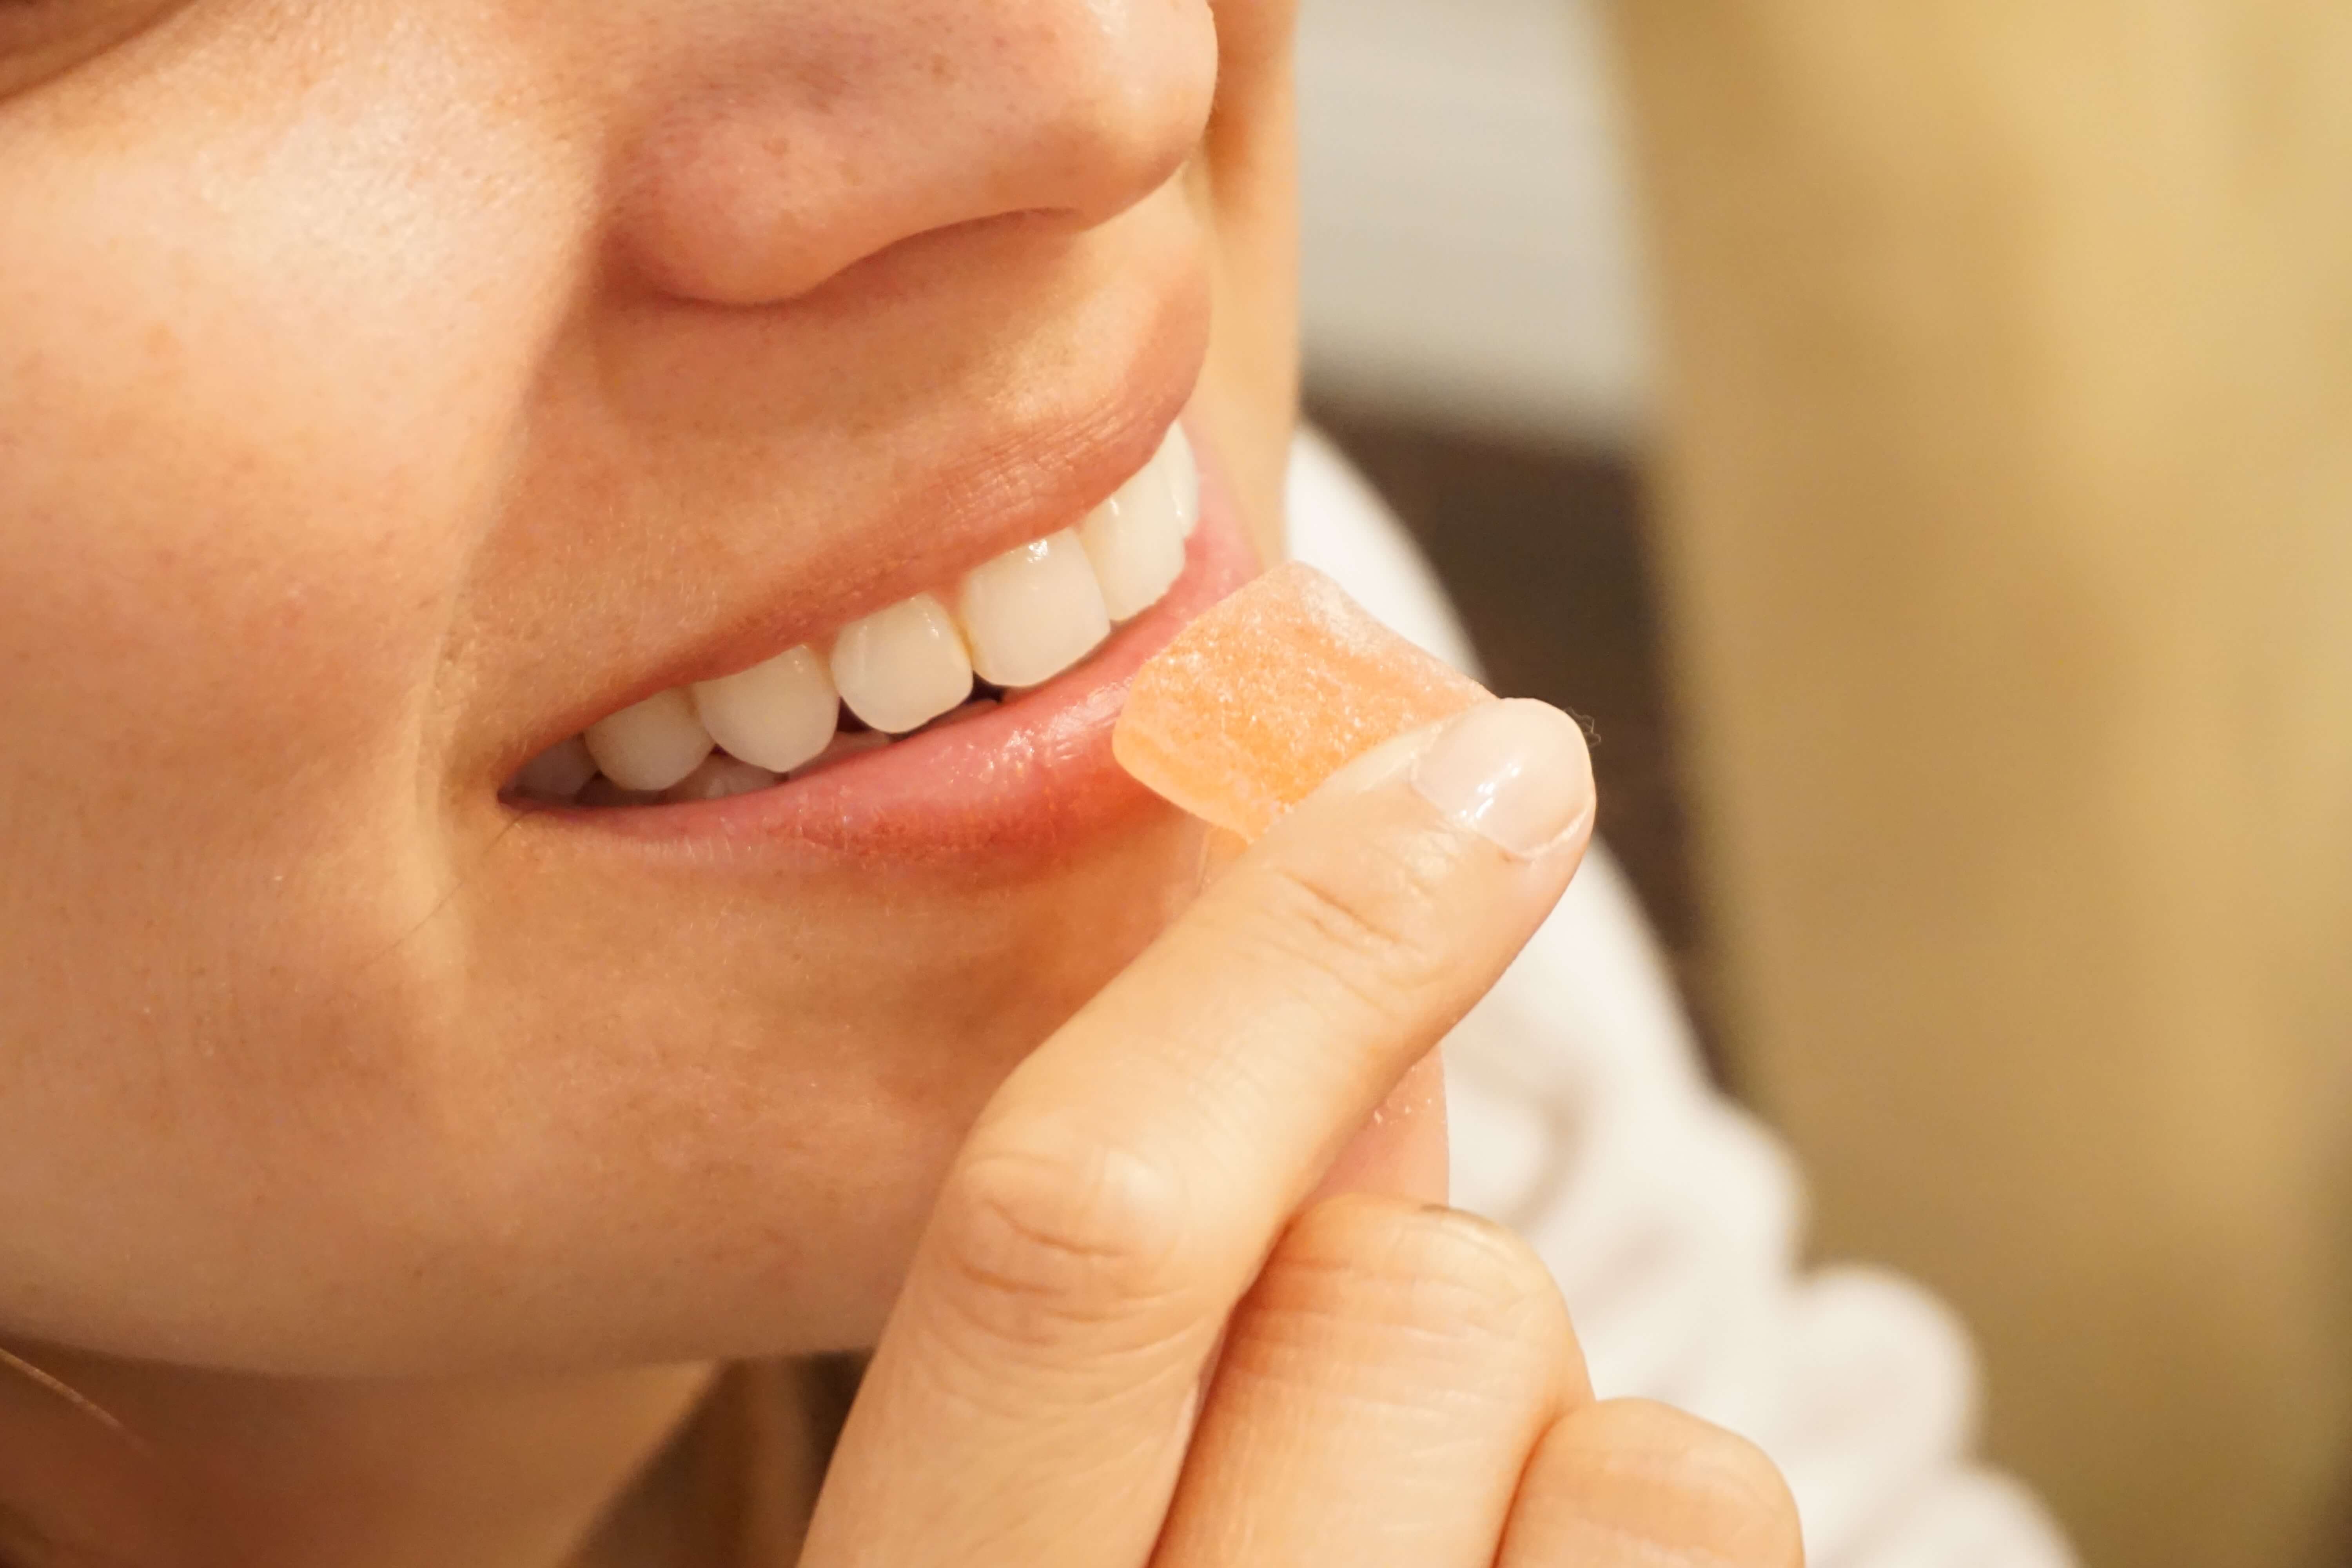 A closeup of a person holding a gummy vitamin to their mouth